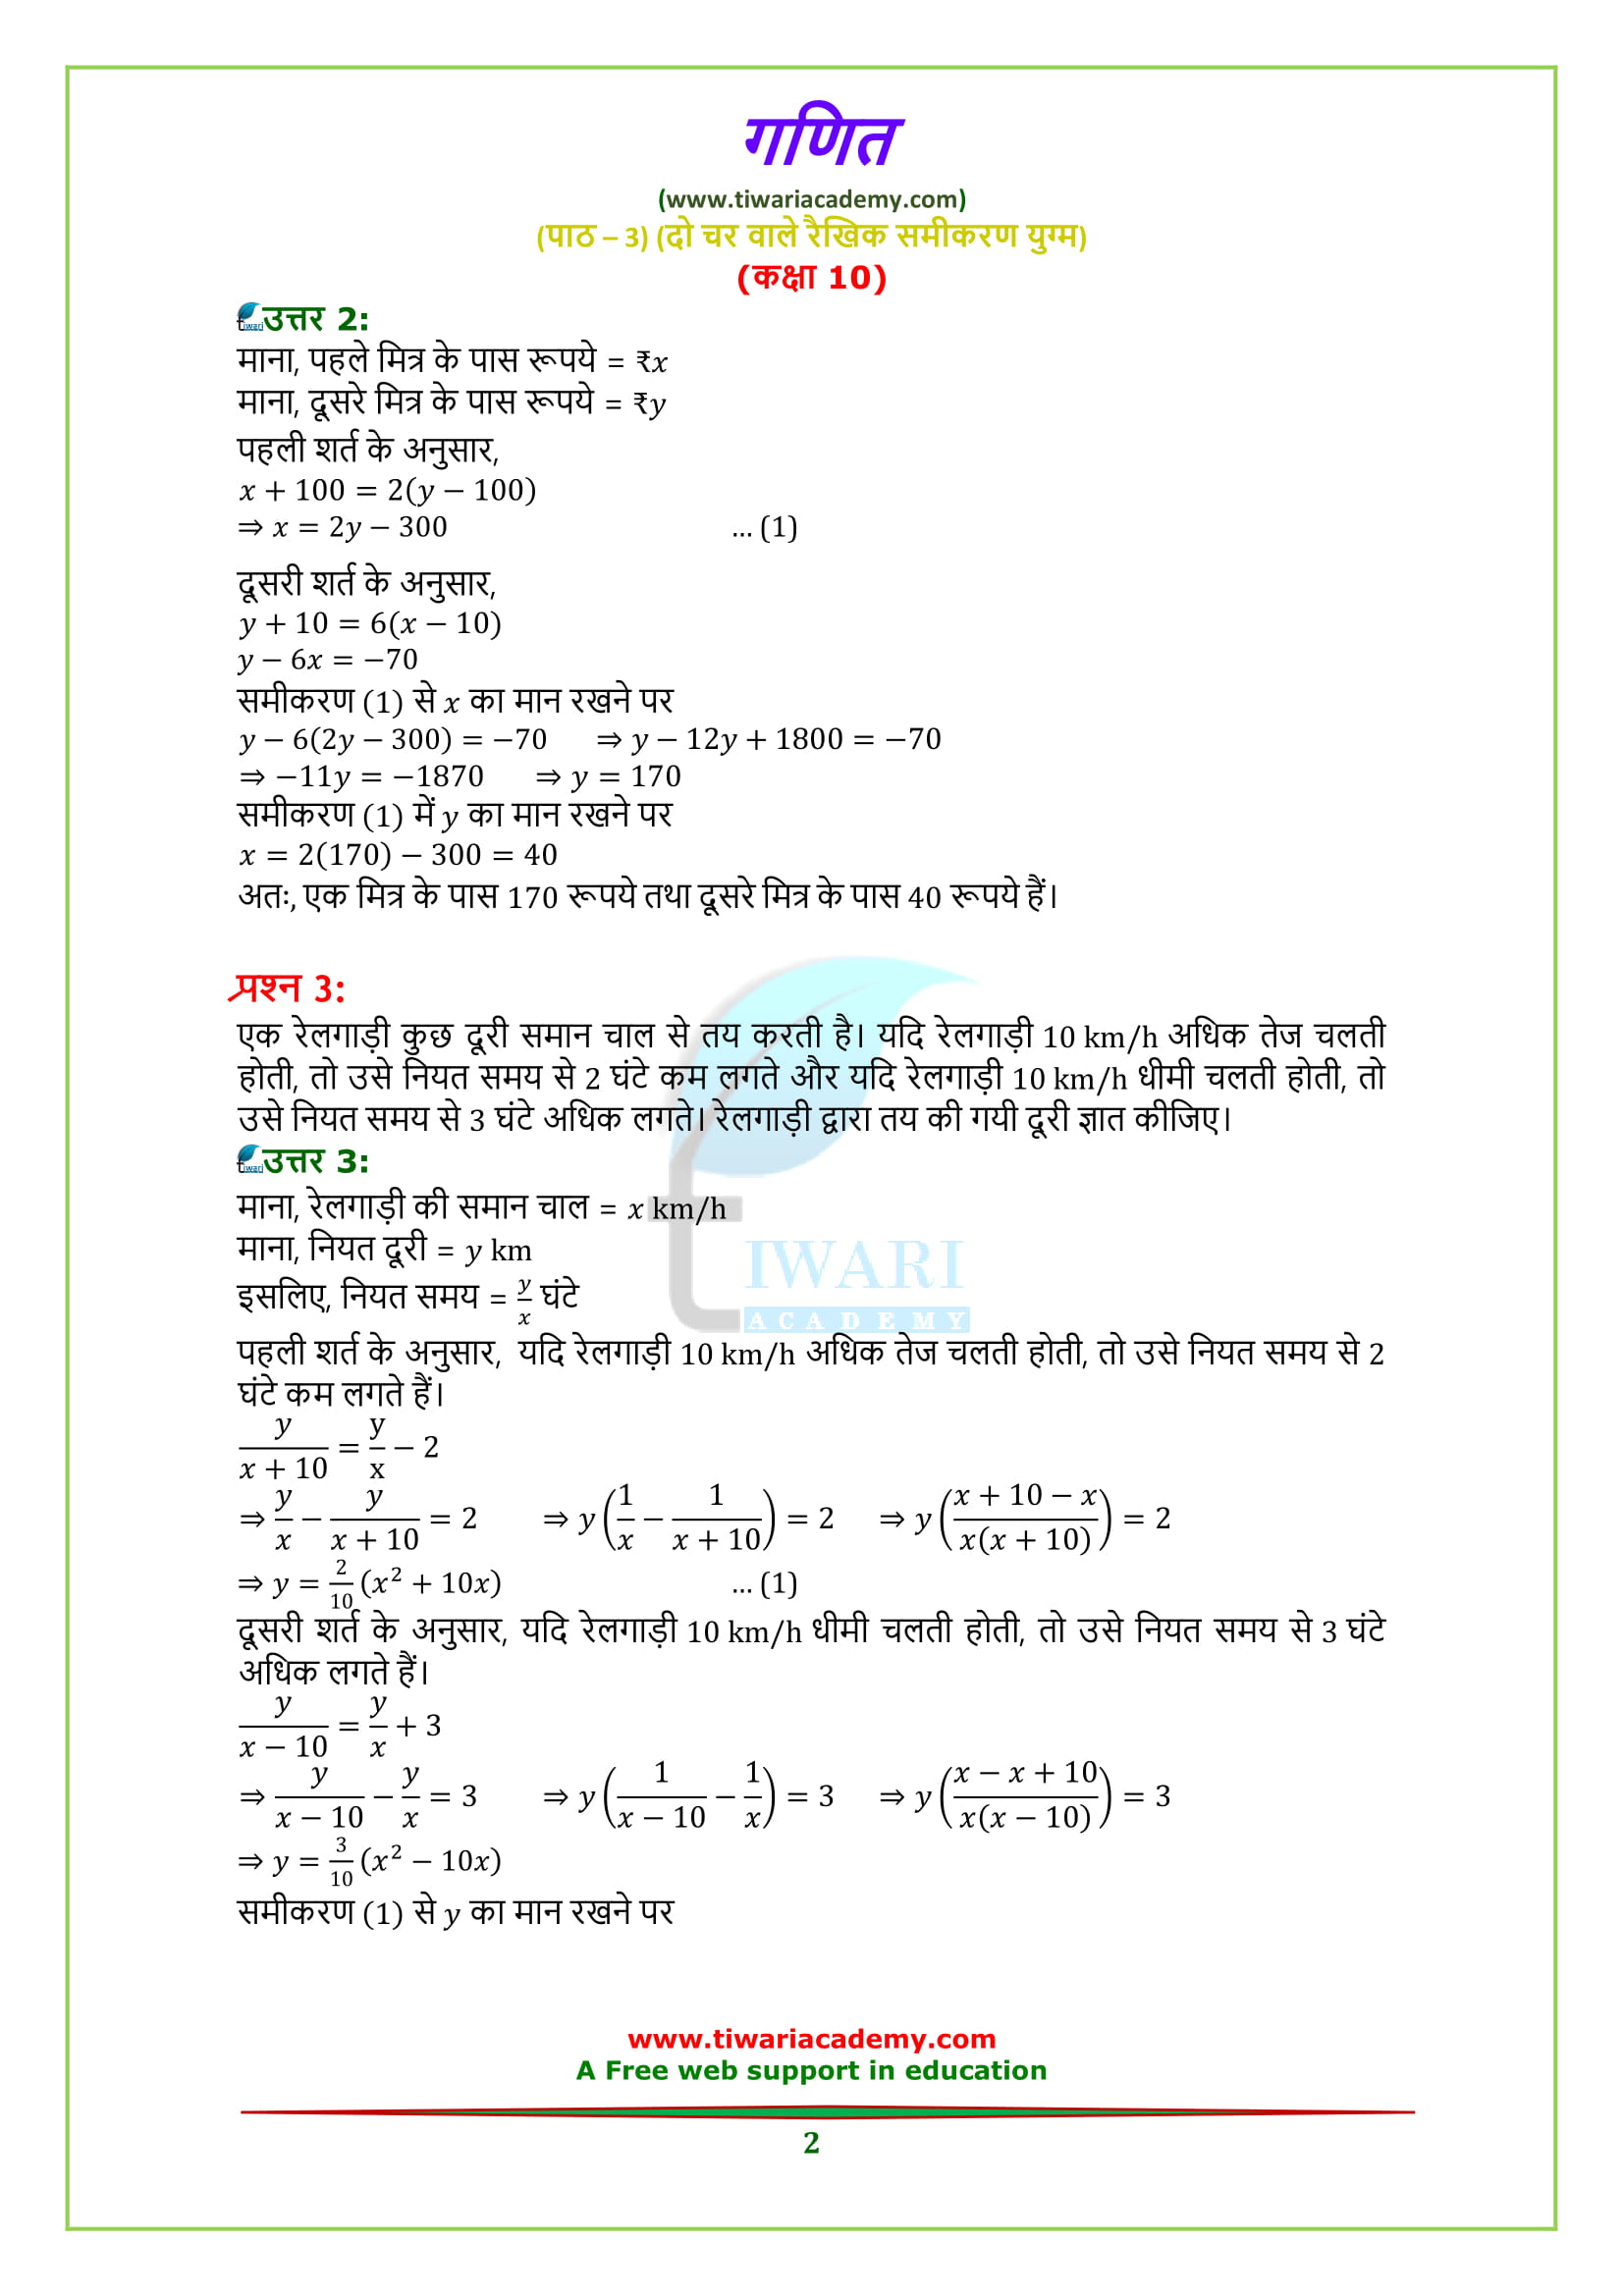 NCERT Solutions for class 10 Maths Chapter 3 Exercise 3.7 in Hindi medium pdf